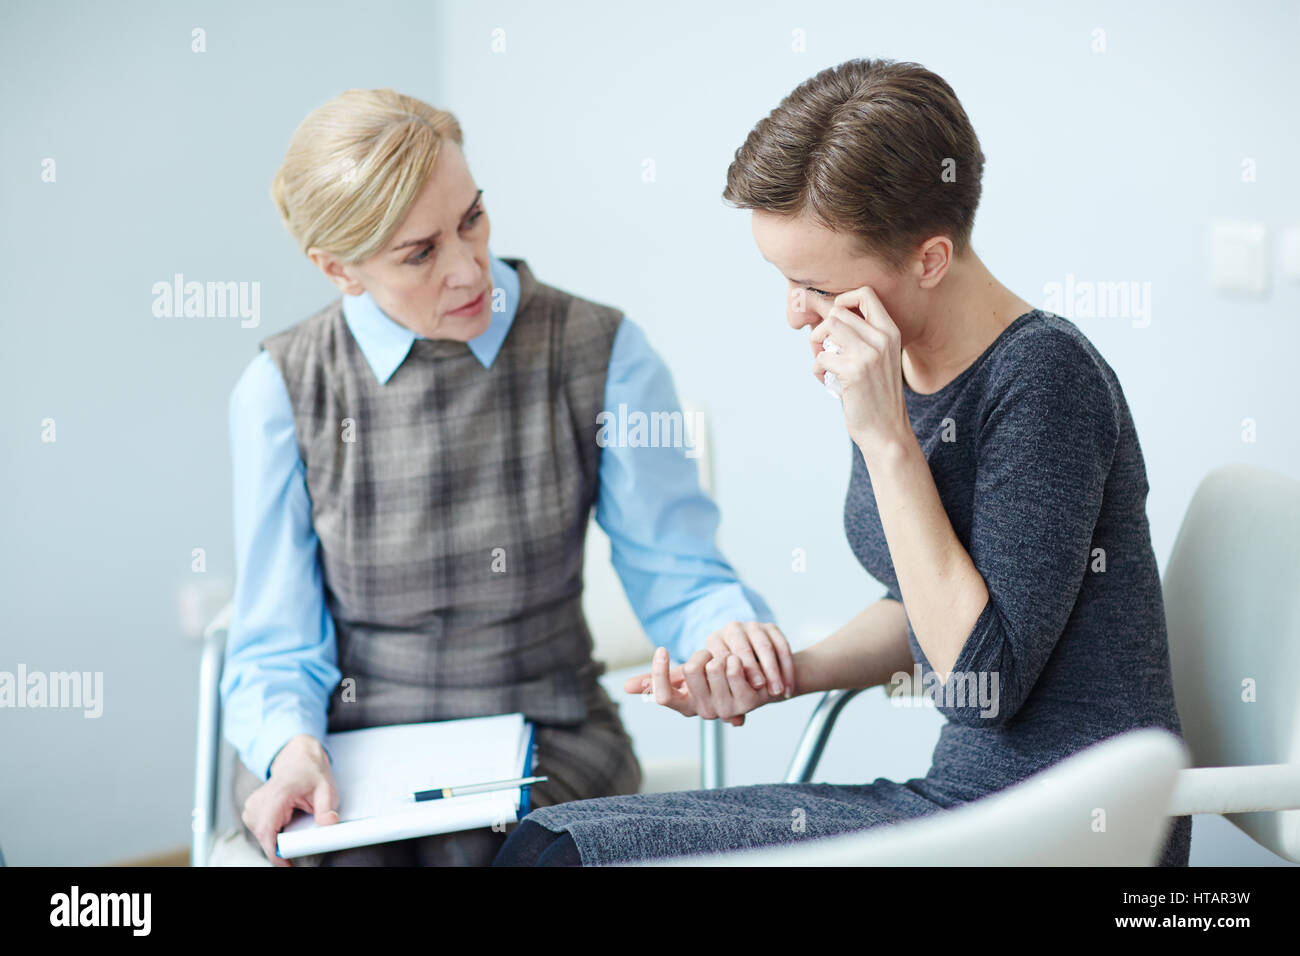 Portrait of young woman crying and opening up mental problems to mentor comforting her in psychological support meeting Stock Photo